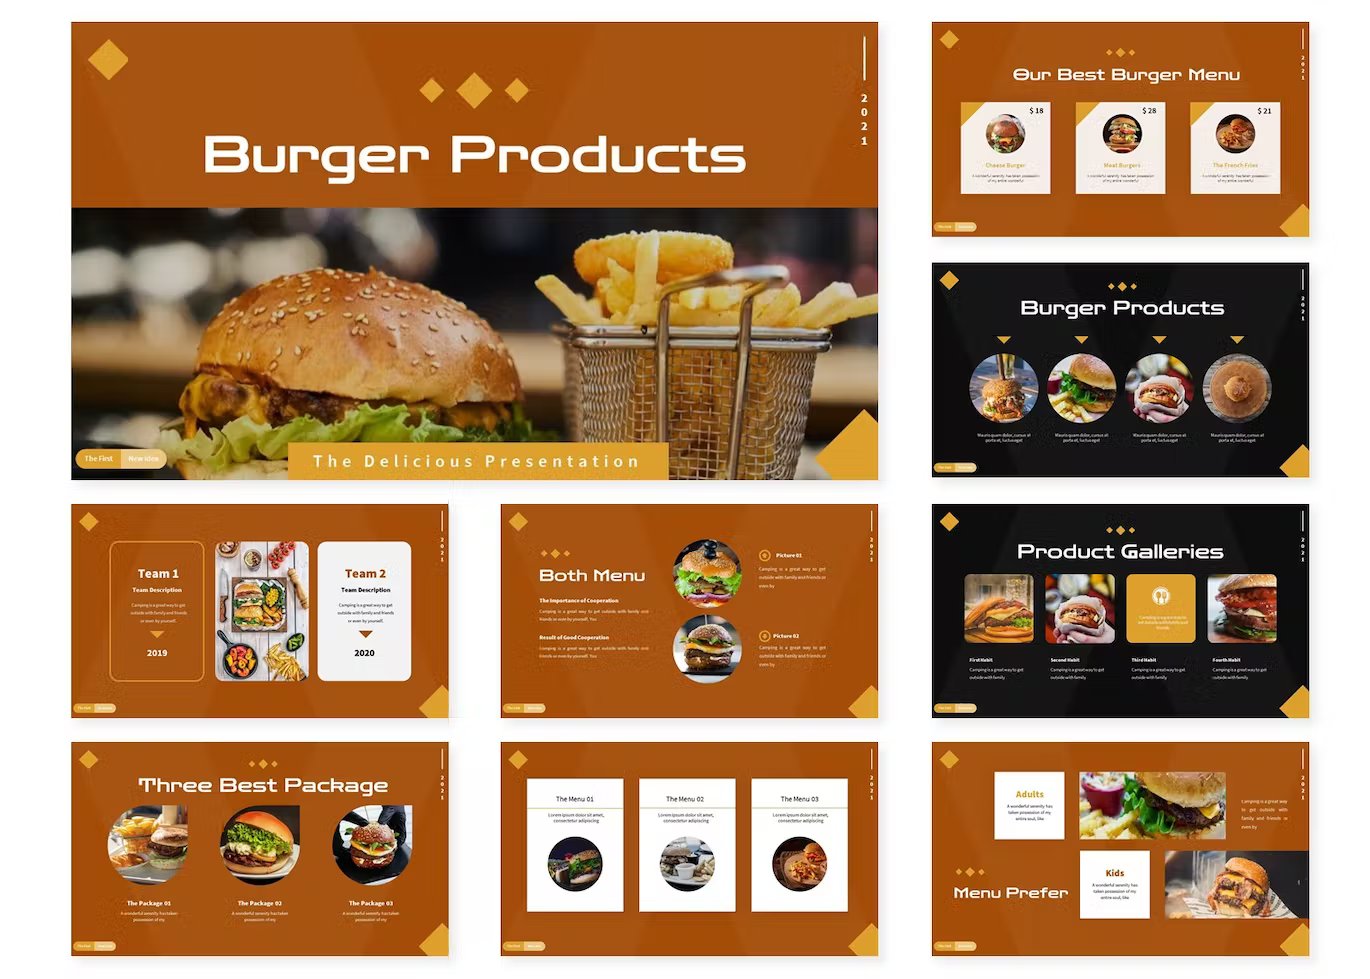 A set of 9 different burger products google slides templates in brown, yellow, white and black on a white background.